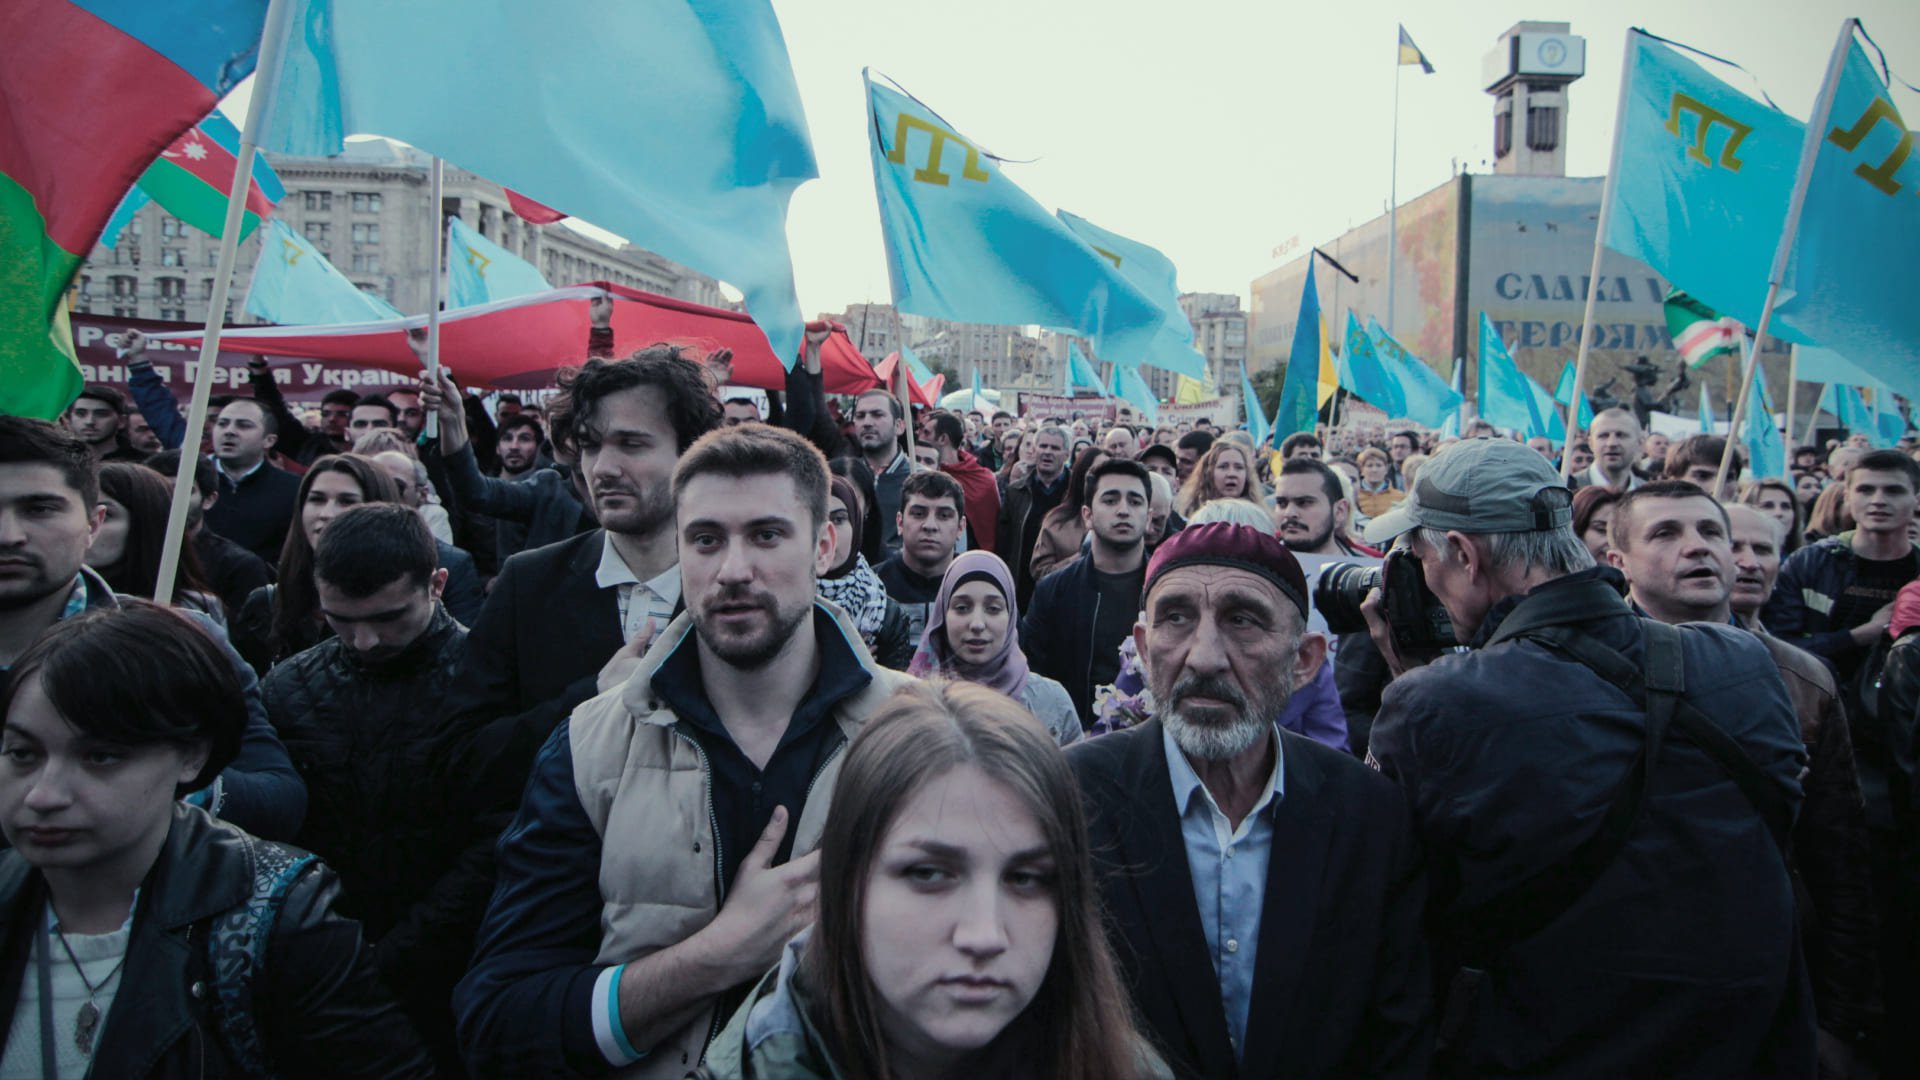 Kyiv, May 18, 2015: demonstration dedicated to the 71st anniversary of the forced Crimean Tatars’ deportation from Crimea by the Soviet government in 1944. Credit: WePlay Holding